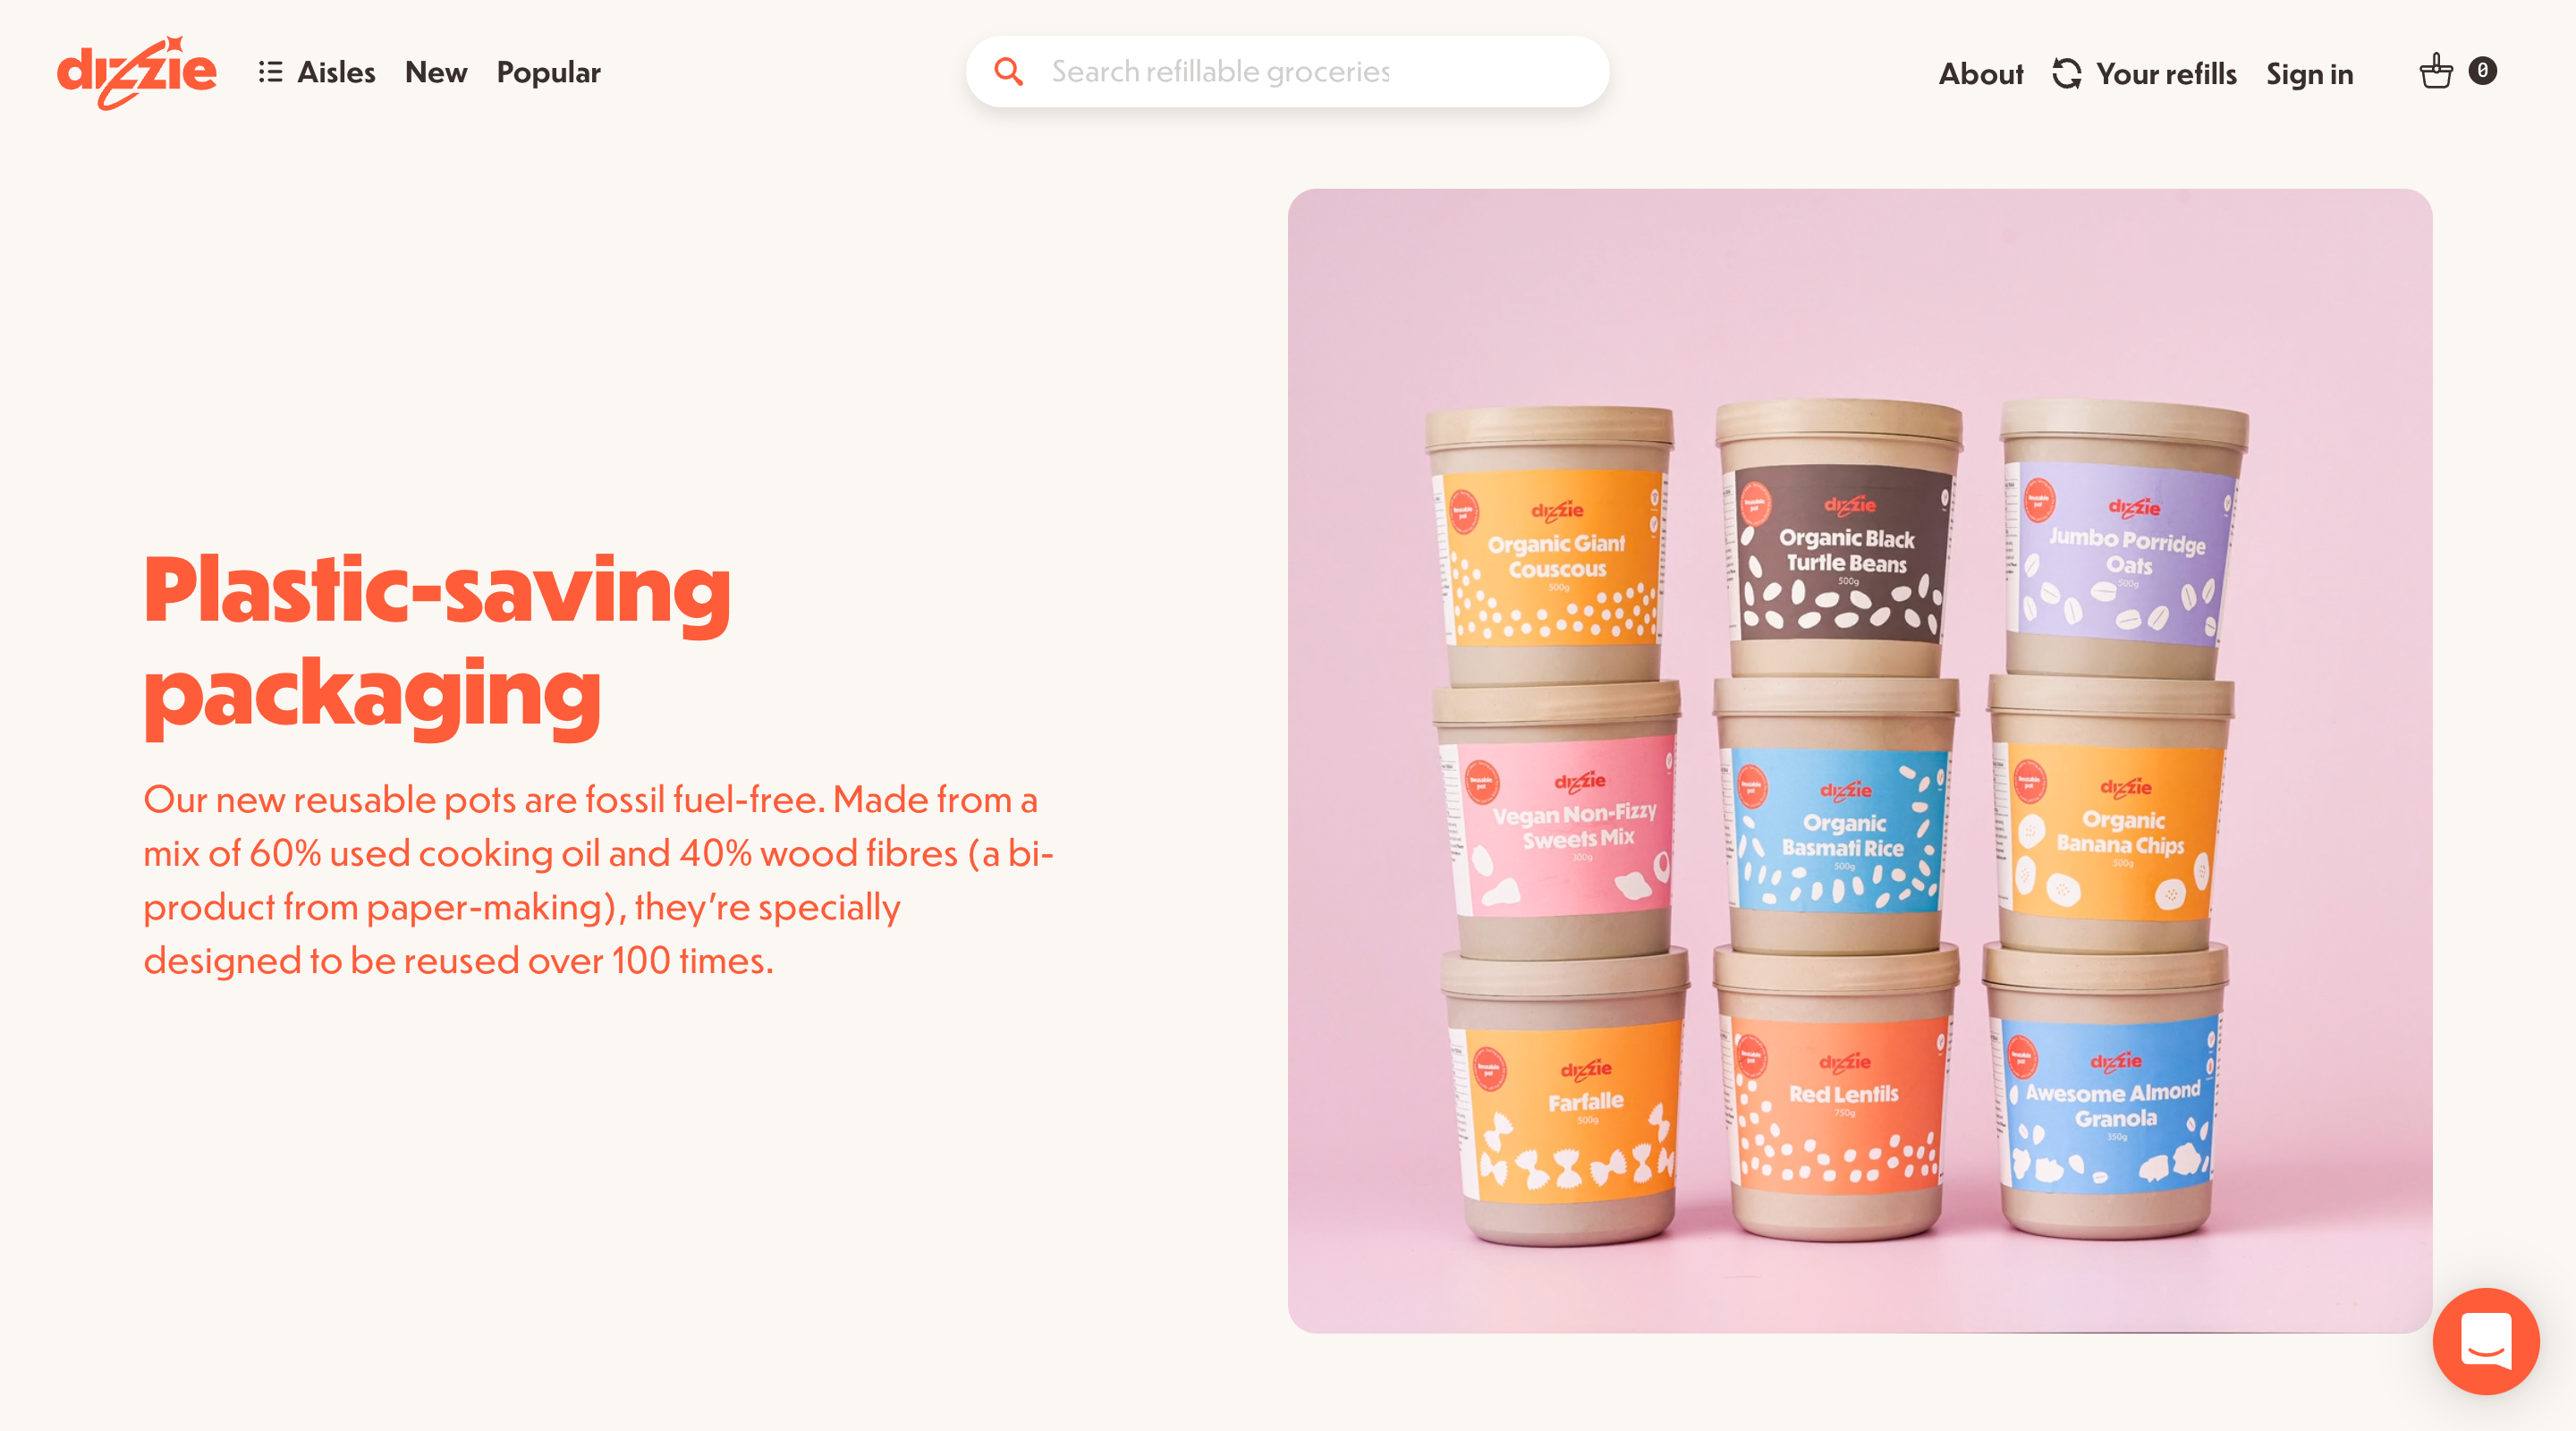 Screenshot of the 'Plastic-saving packaging' section of the Dizzie website. The header contains the Dizzie logo, main navigation, and a search bar. A photograph on the right side shows Dizzie pots stacked on top of each other. Beside this a paragraph explains that Dizzie pots are reusable up to 100 times.